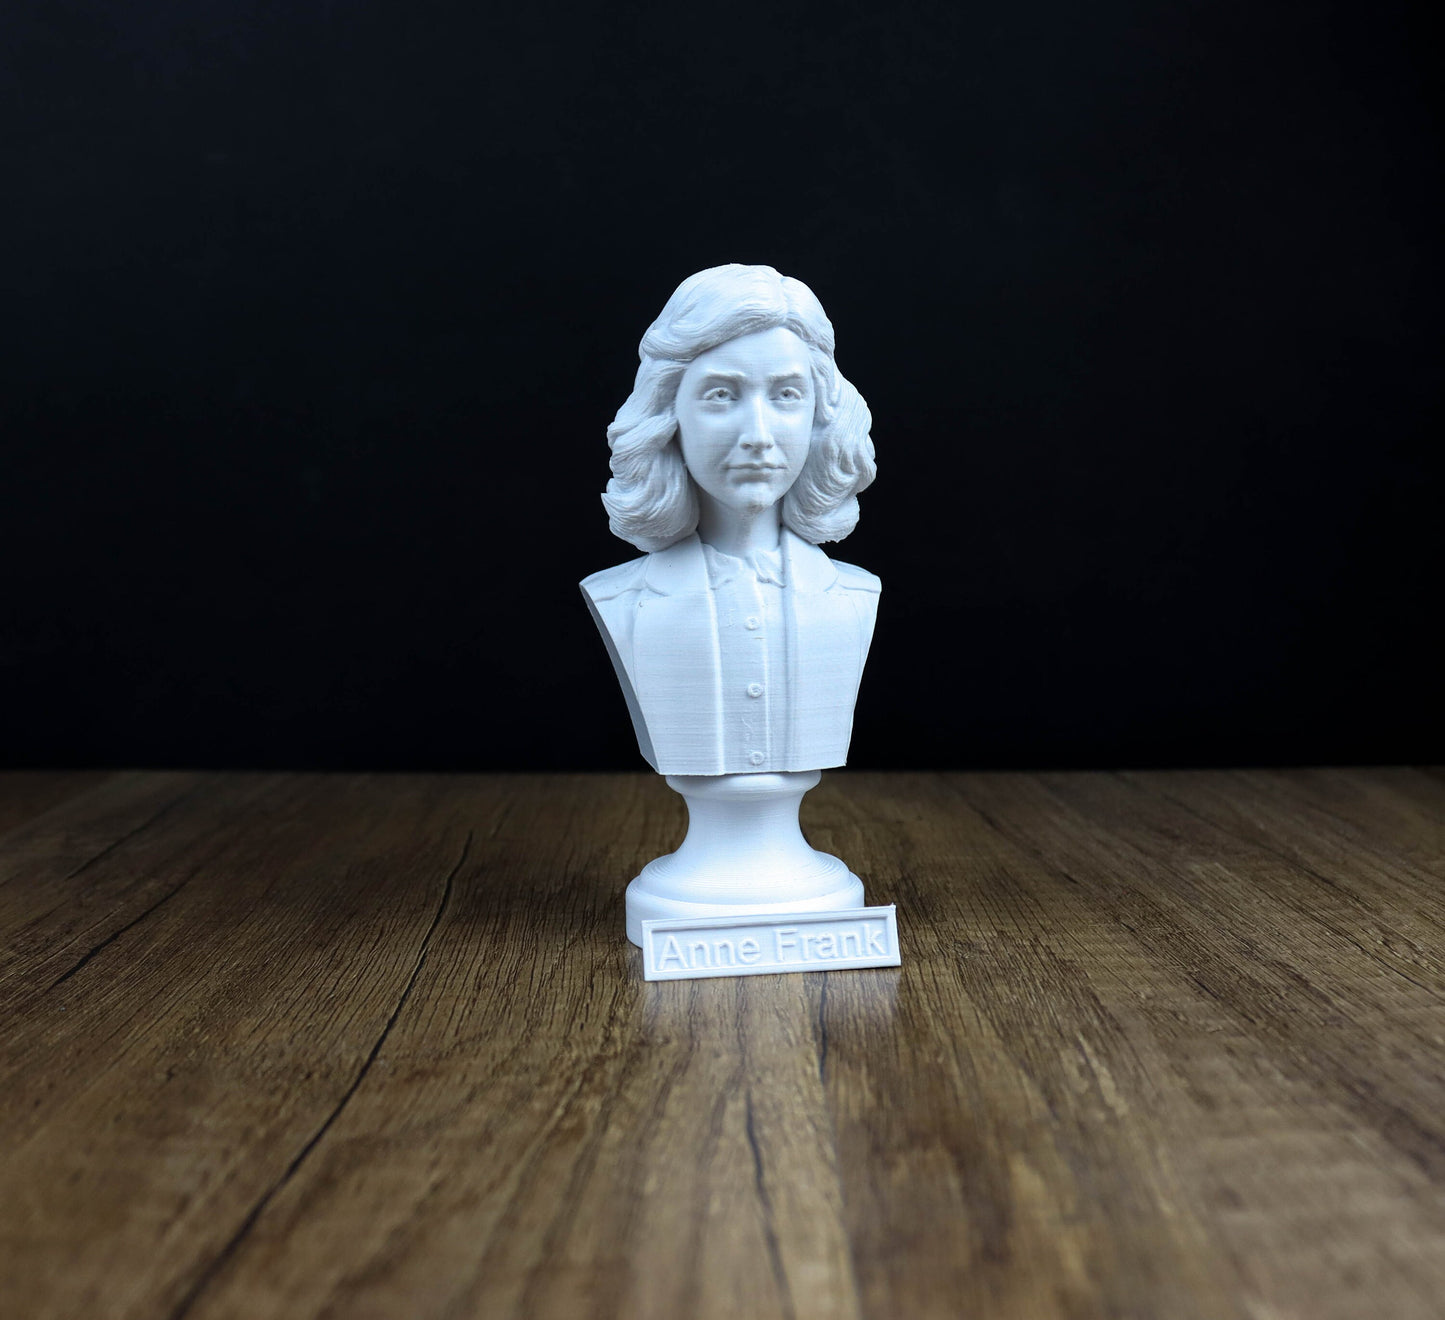 Anne Frank Bust, Statue